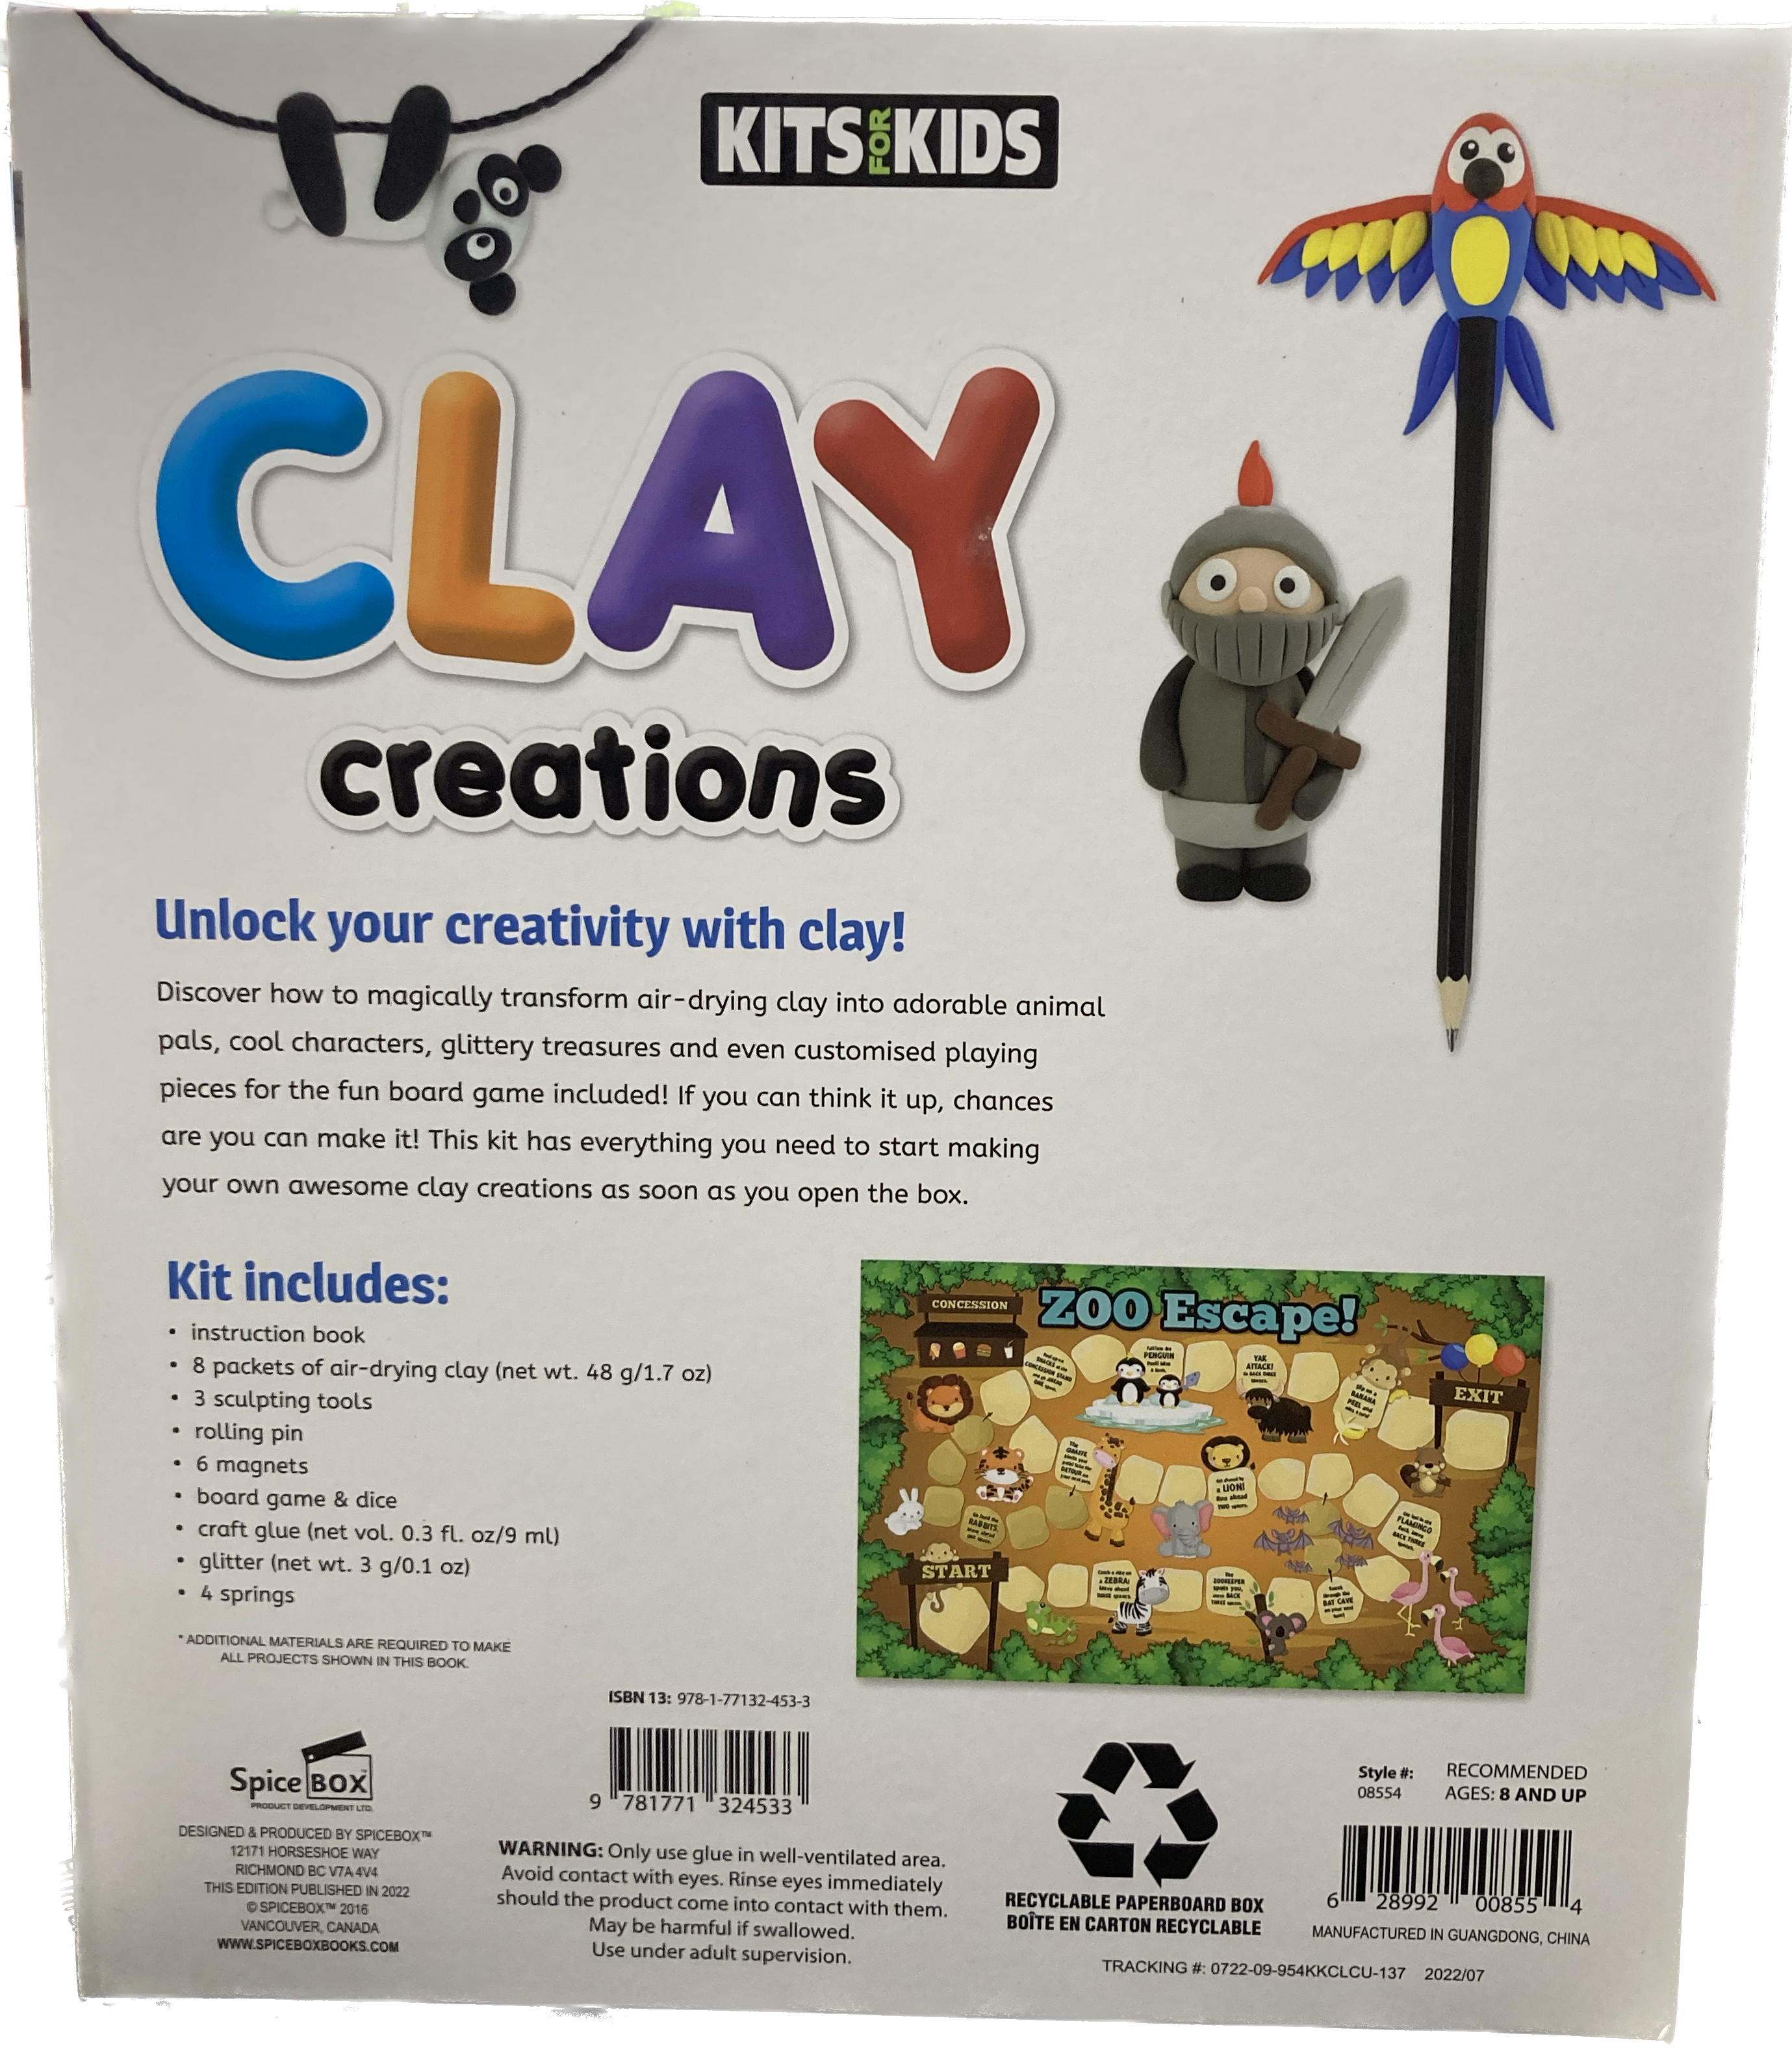 SpiceBox Kits for Kids Clay Creations